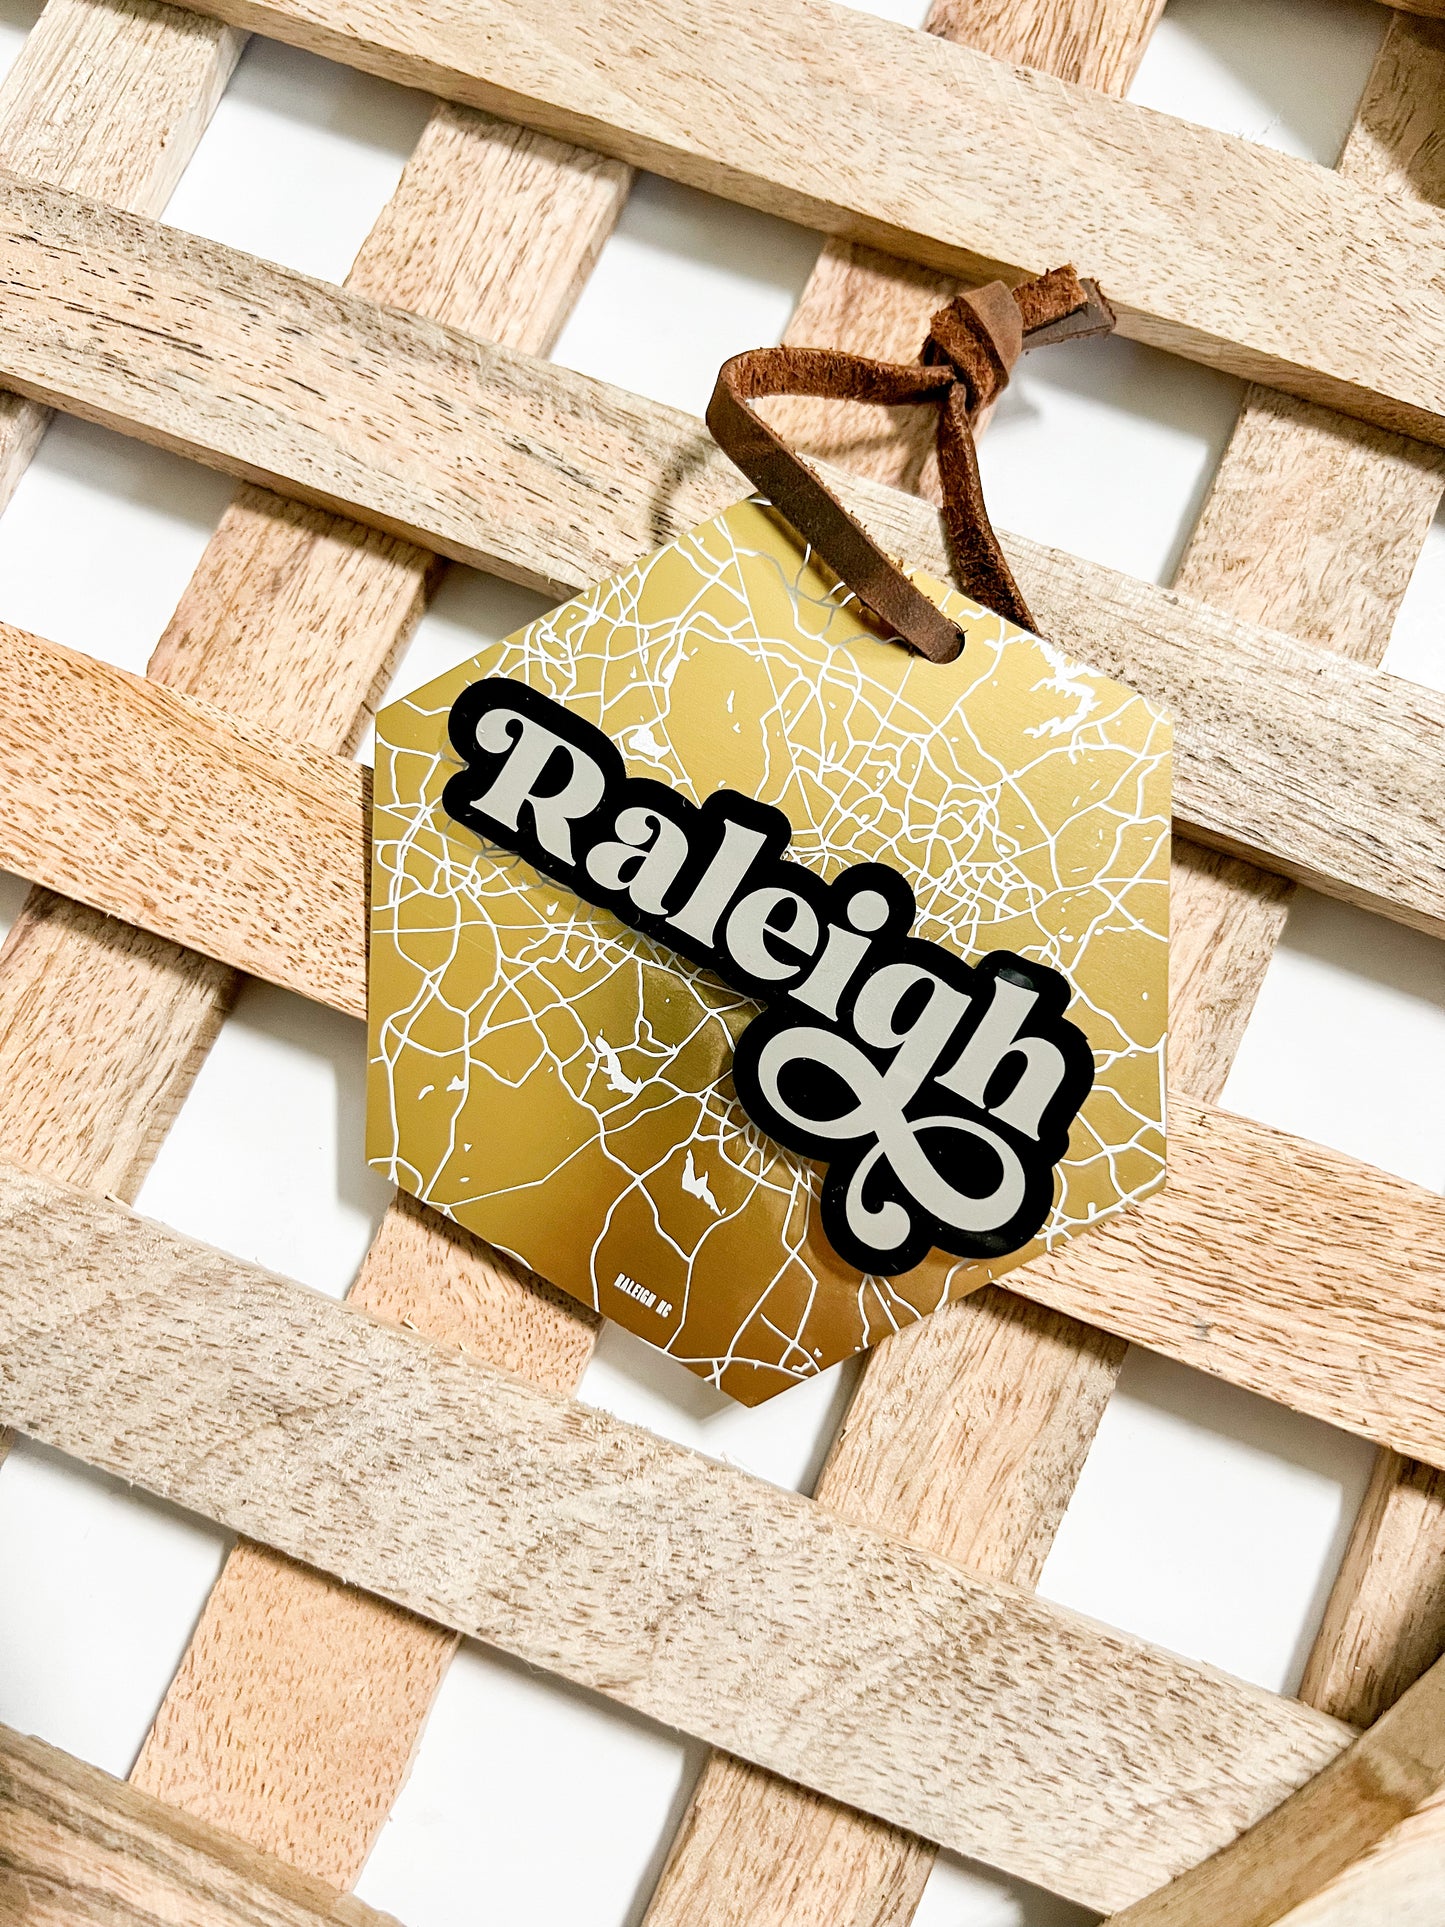 Raleigh Gold Metal Ornament